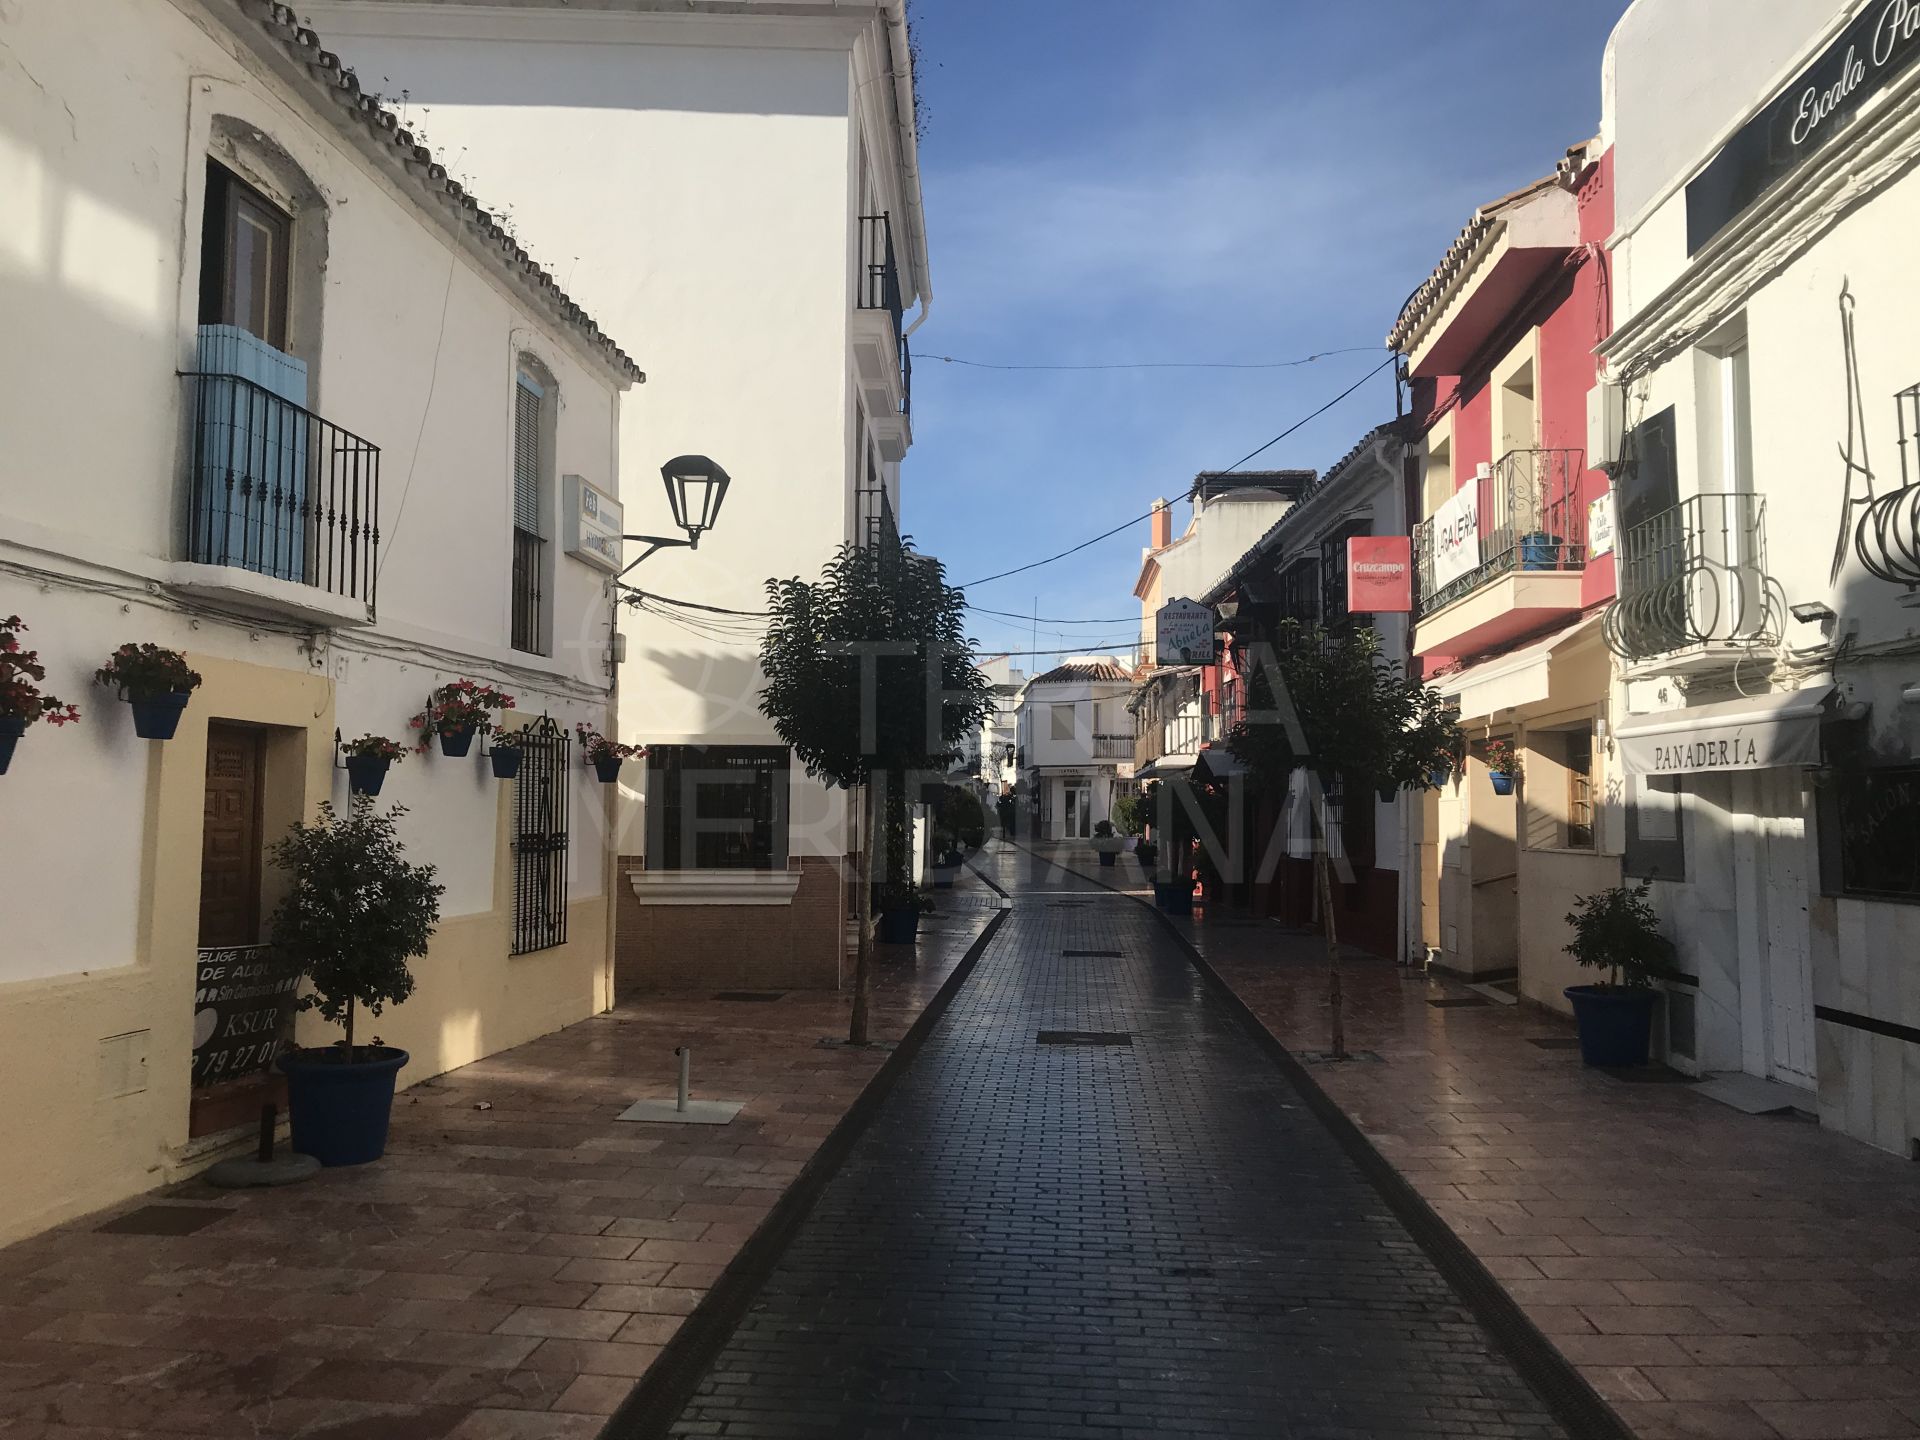 Commercial premises for sale in Estepona centre close to the beach